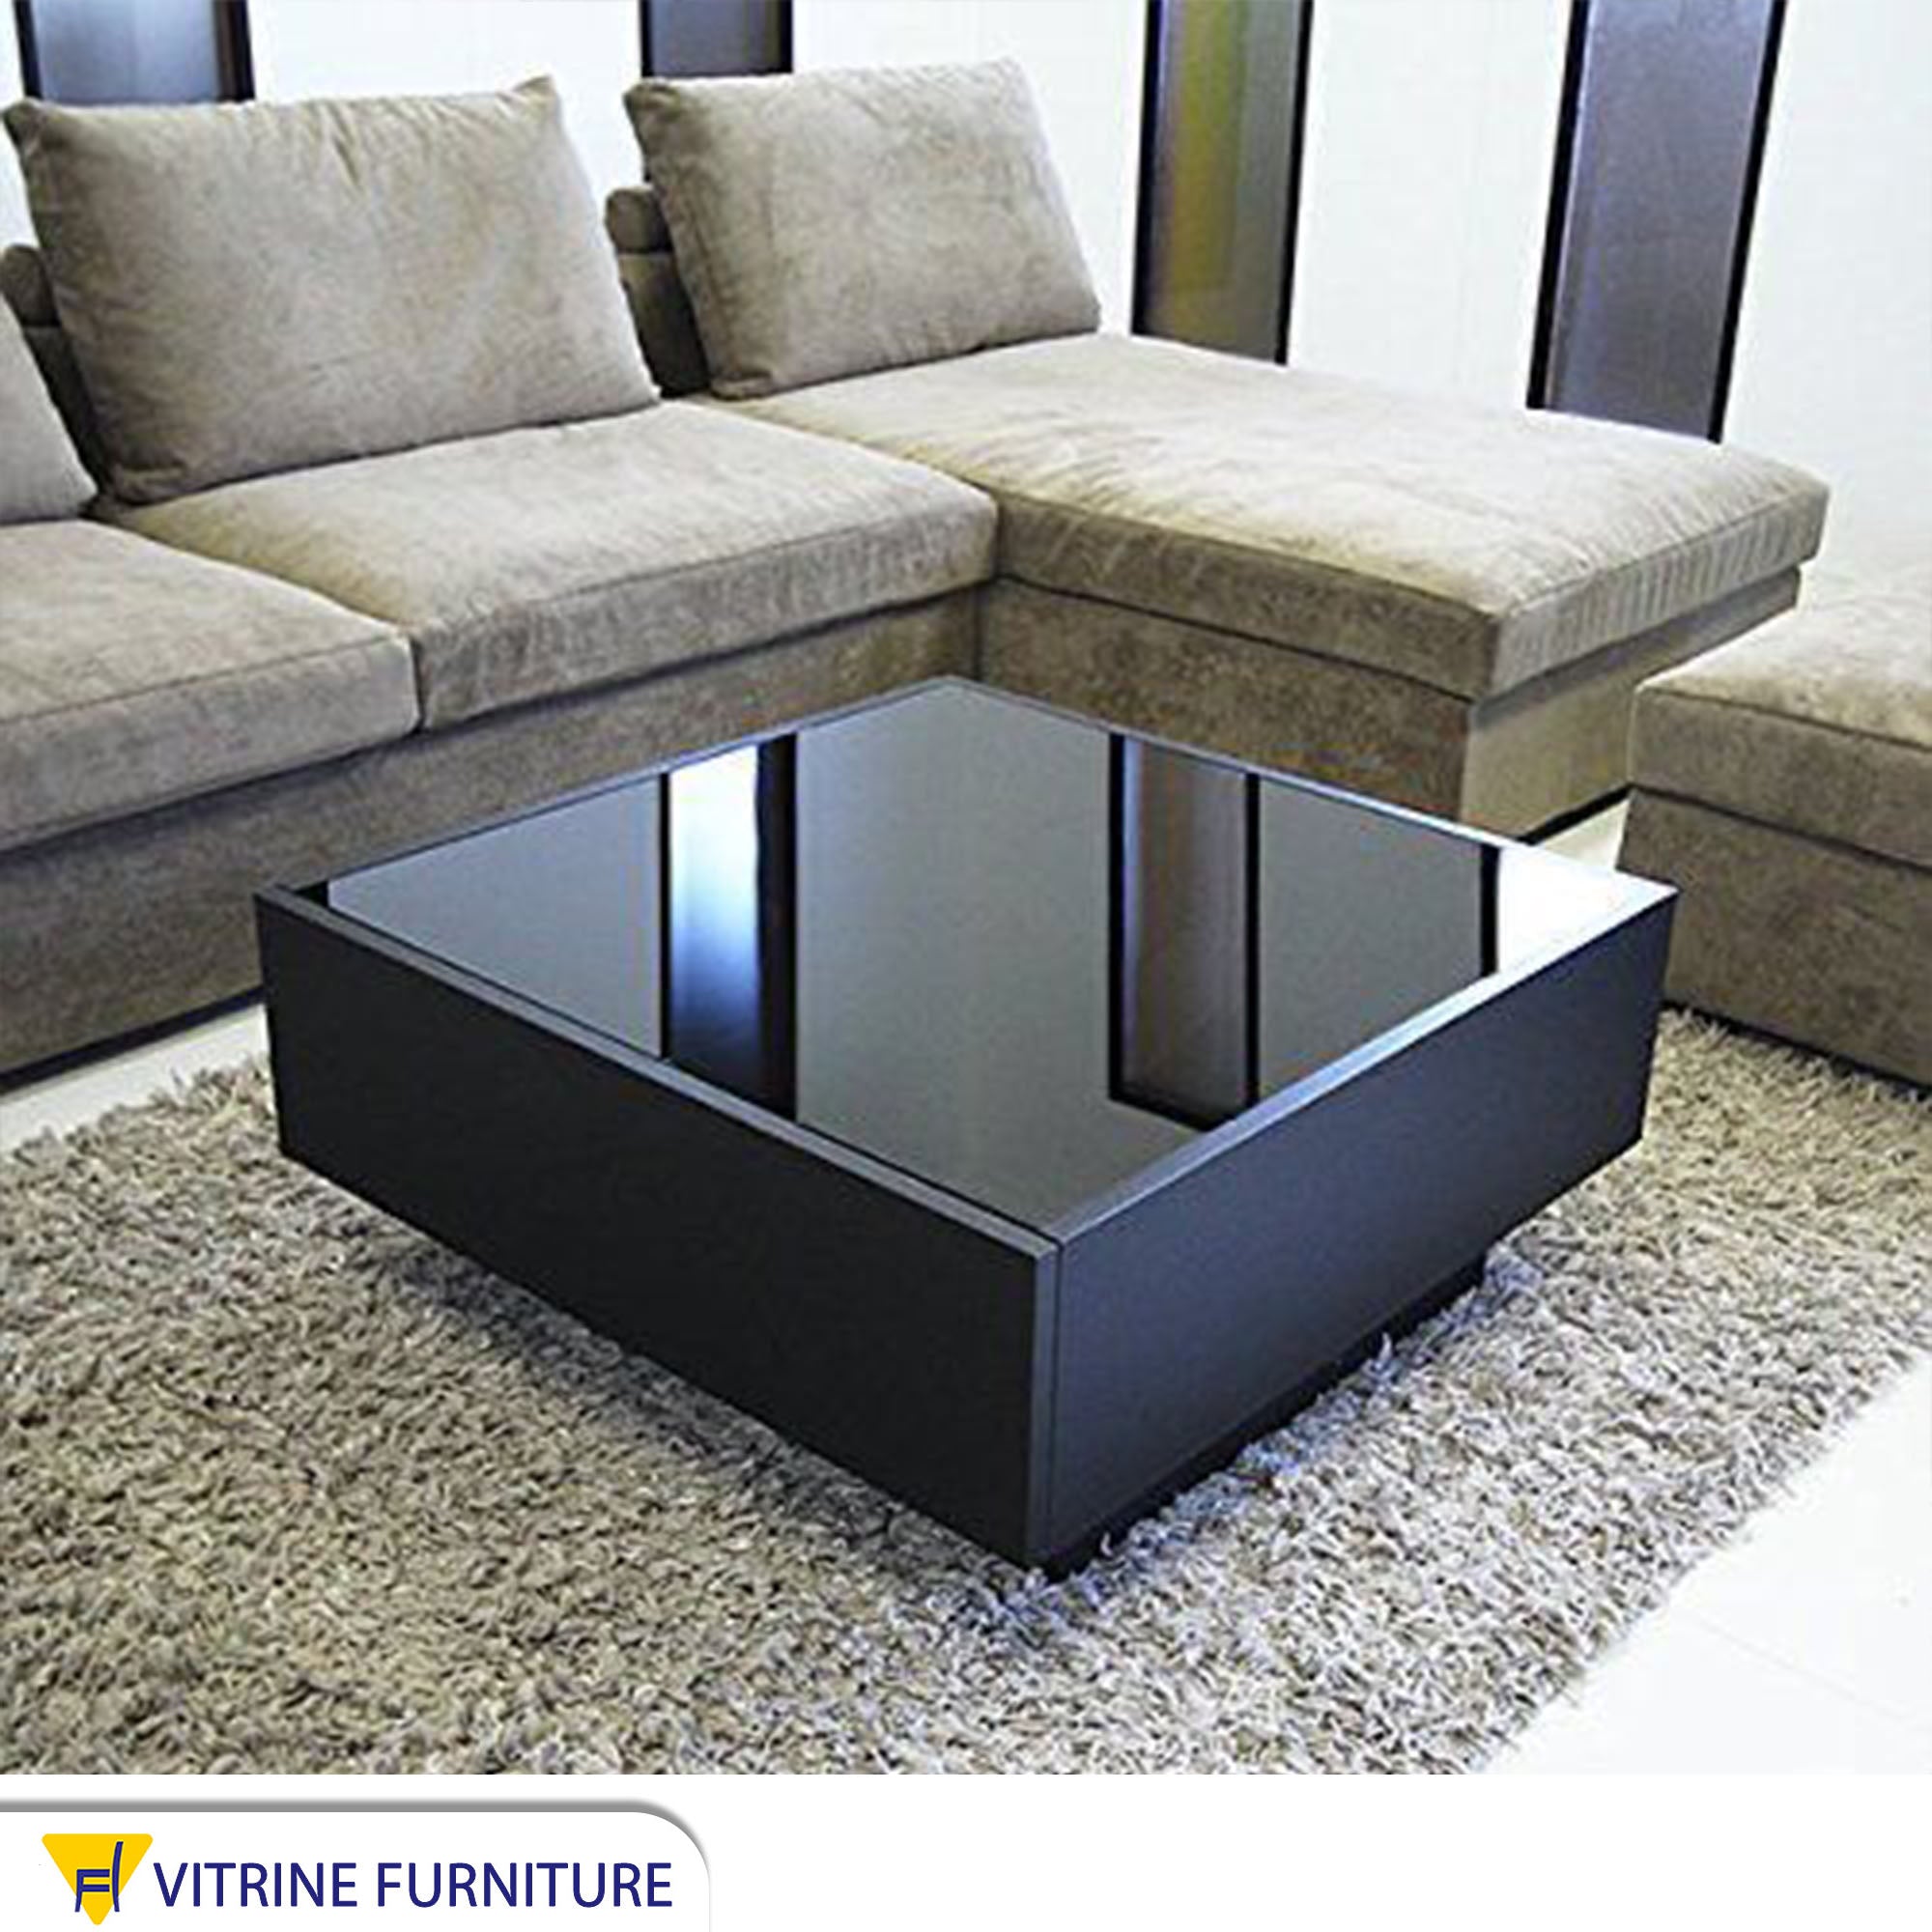 Black center table with clear glass